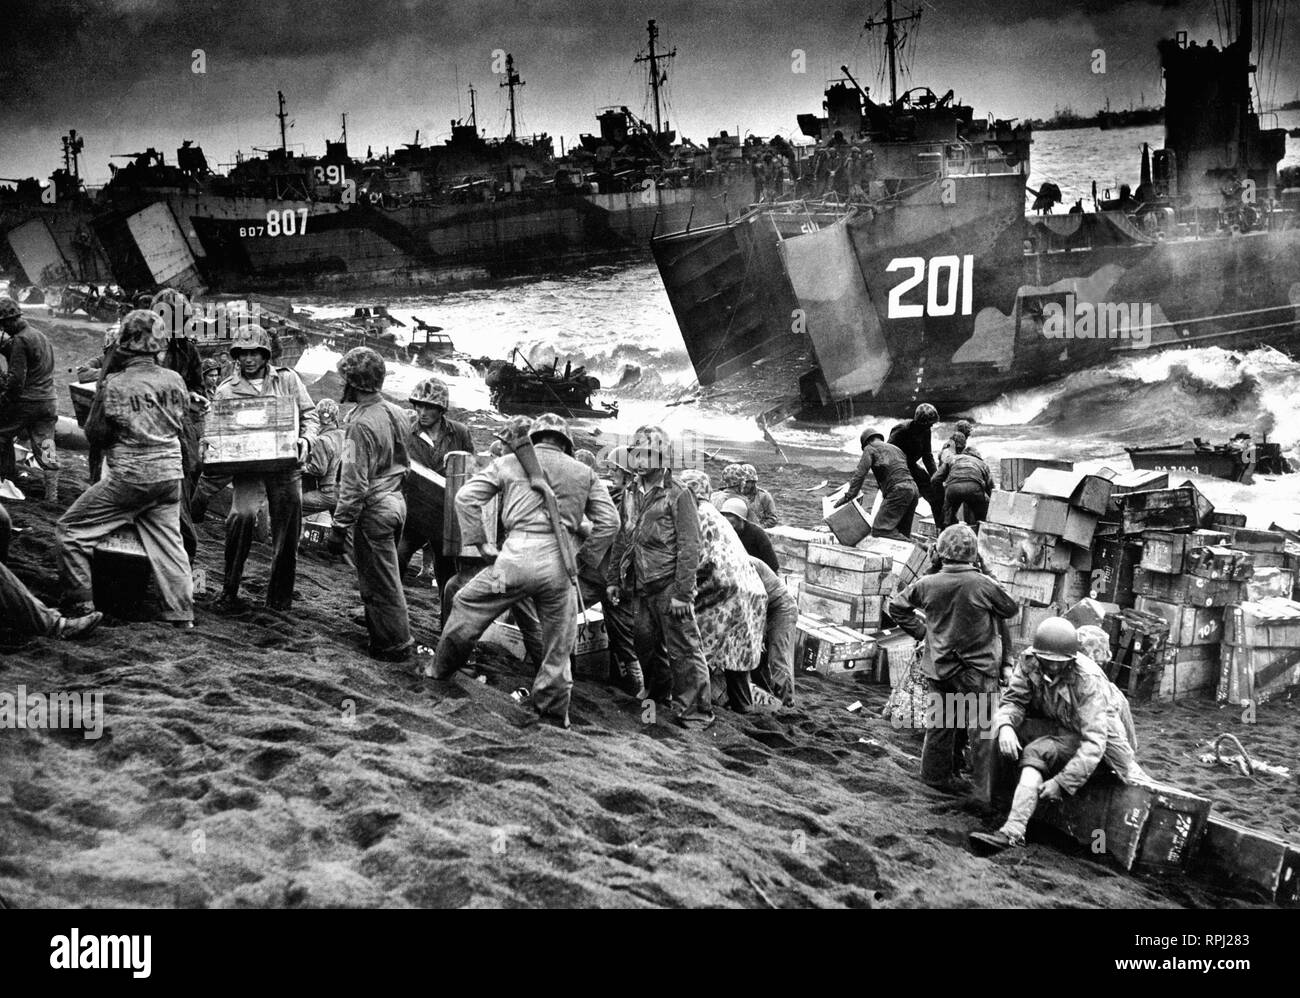 Out of the gaping mouths of Coast Guard and Navy Landing Craft, rose the great flow of invasion supplies to the blackened sands of Iwo Jima, a few hours after the Marines had wrested their foothold on the vital island. 1945. Stock Photo